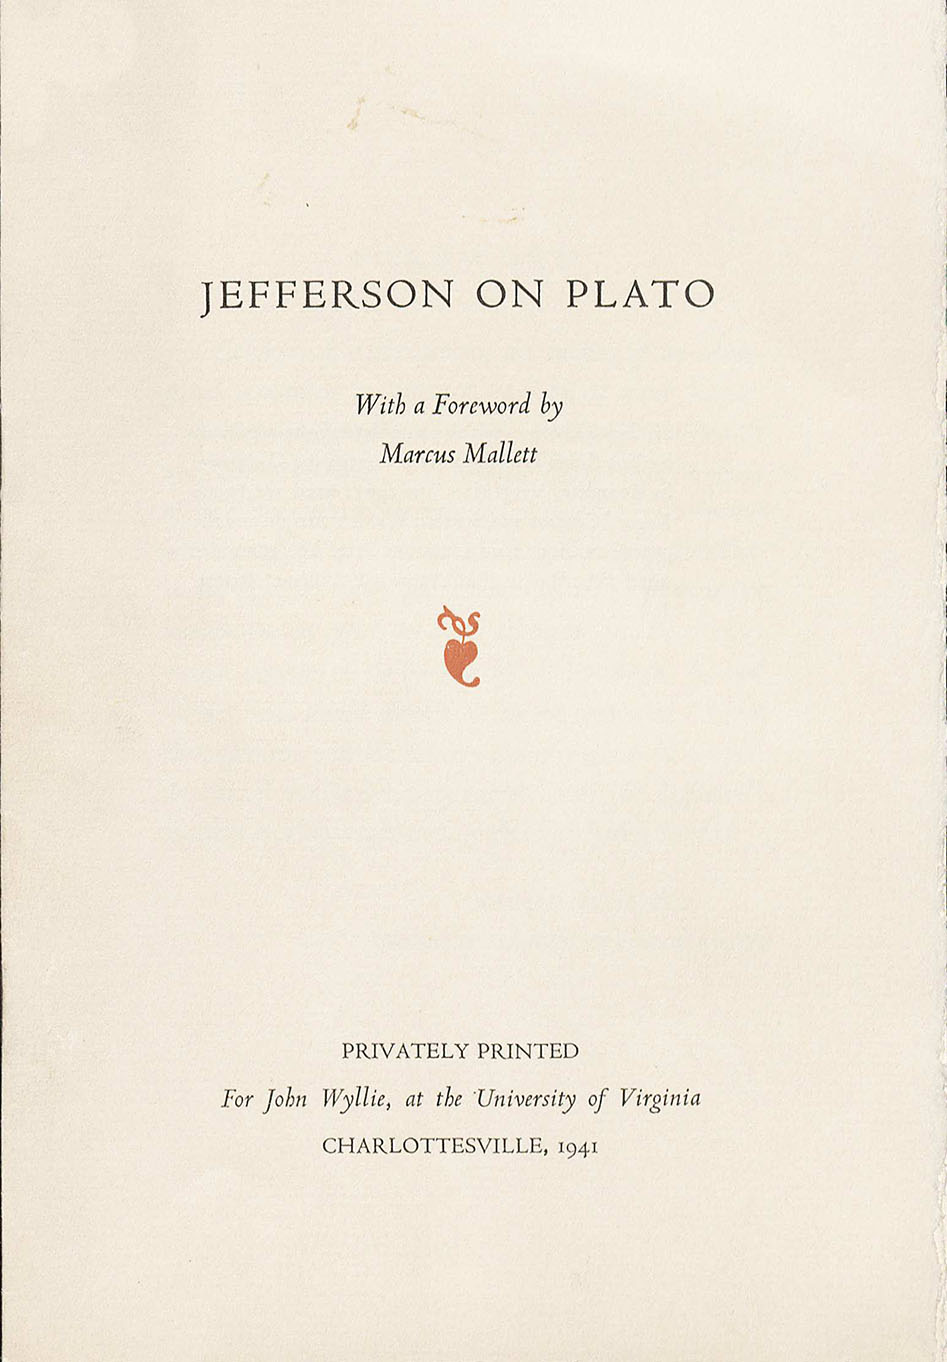 Jefferson, Thomas. Jefferson on Plato. Roanoke, Virginia: Stone Printing & Manufacturing Company, 1941. (B393 .J4 1941) Thomas Jefferson wrote a review on Plato’s infamous The Republic of Plato and, it is apparent that he was not particularly impressed by the writings of Plato. This brief and concise five page review provides Jefferson’s raw opinion of Plato’s ideals. Similar pamphlets were printed, totaling 600 copies. This one in particular was privately printed for John Wyllie, early curator of rare books and manuscripts at the University of Virginia. 